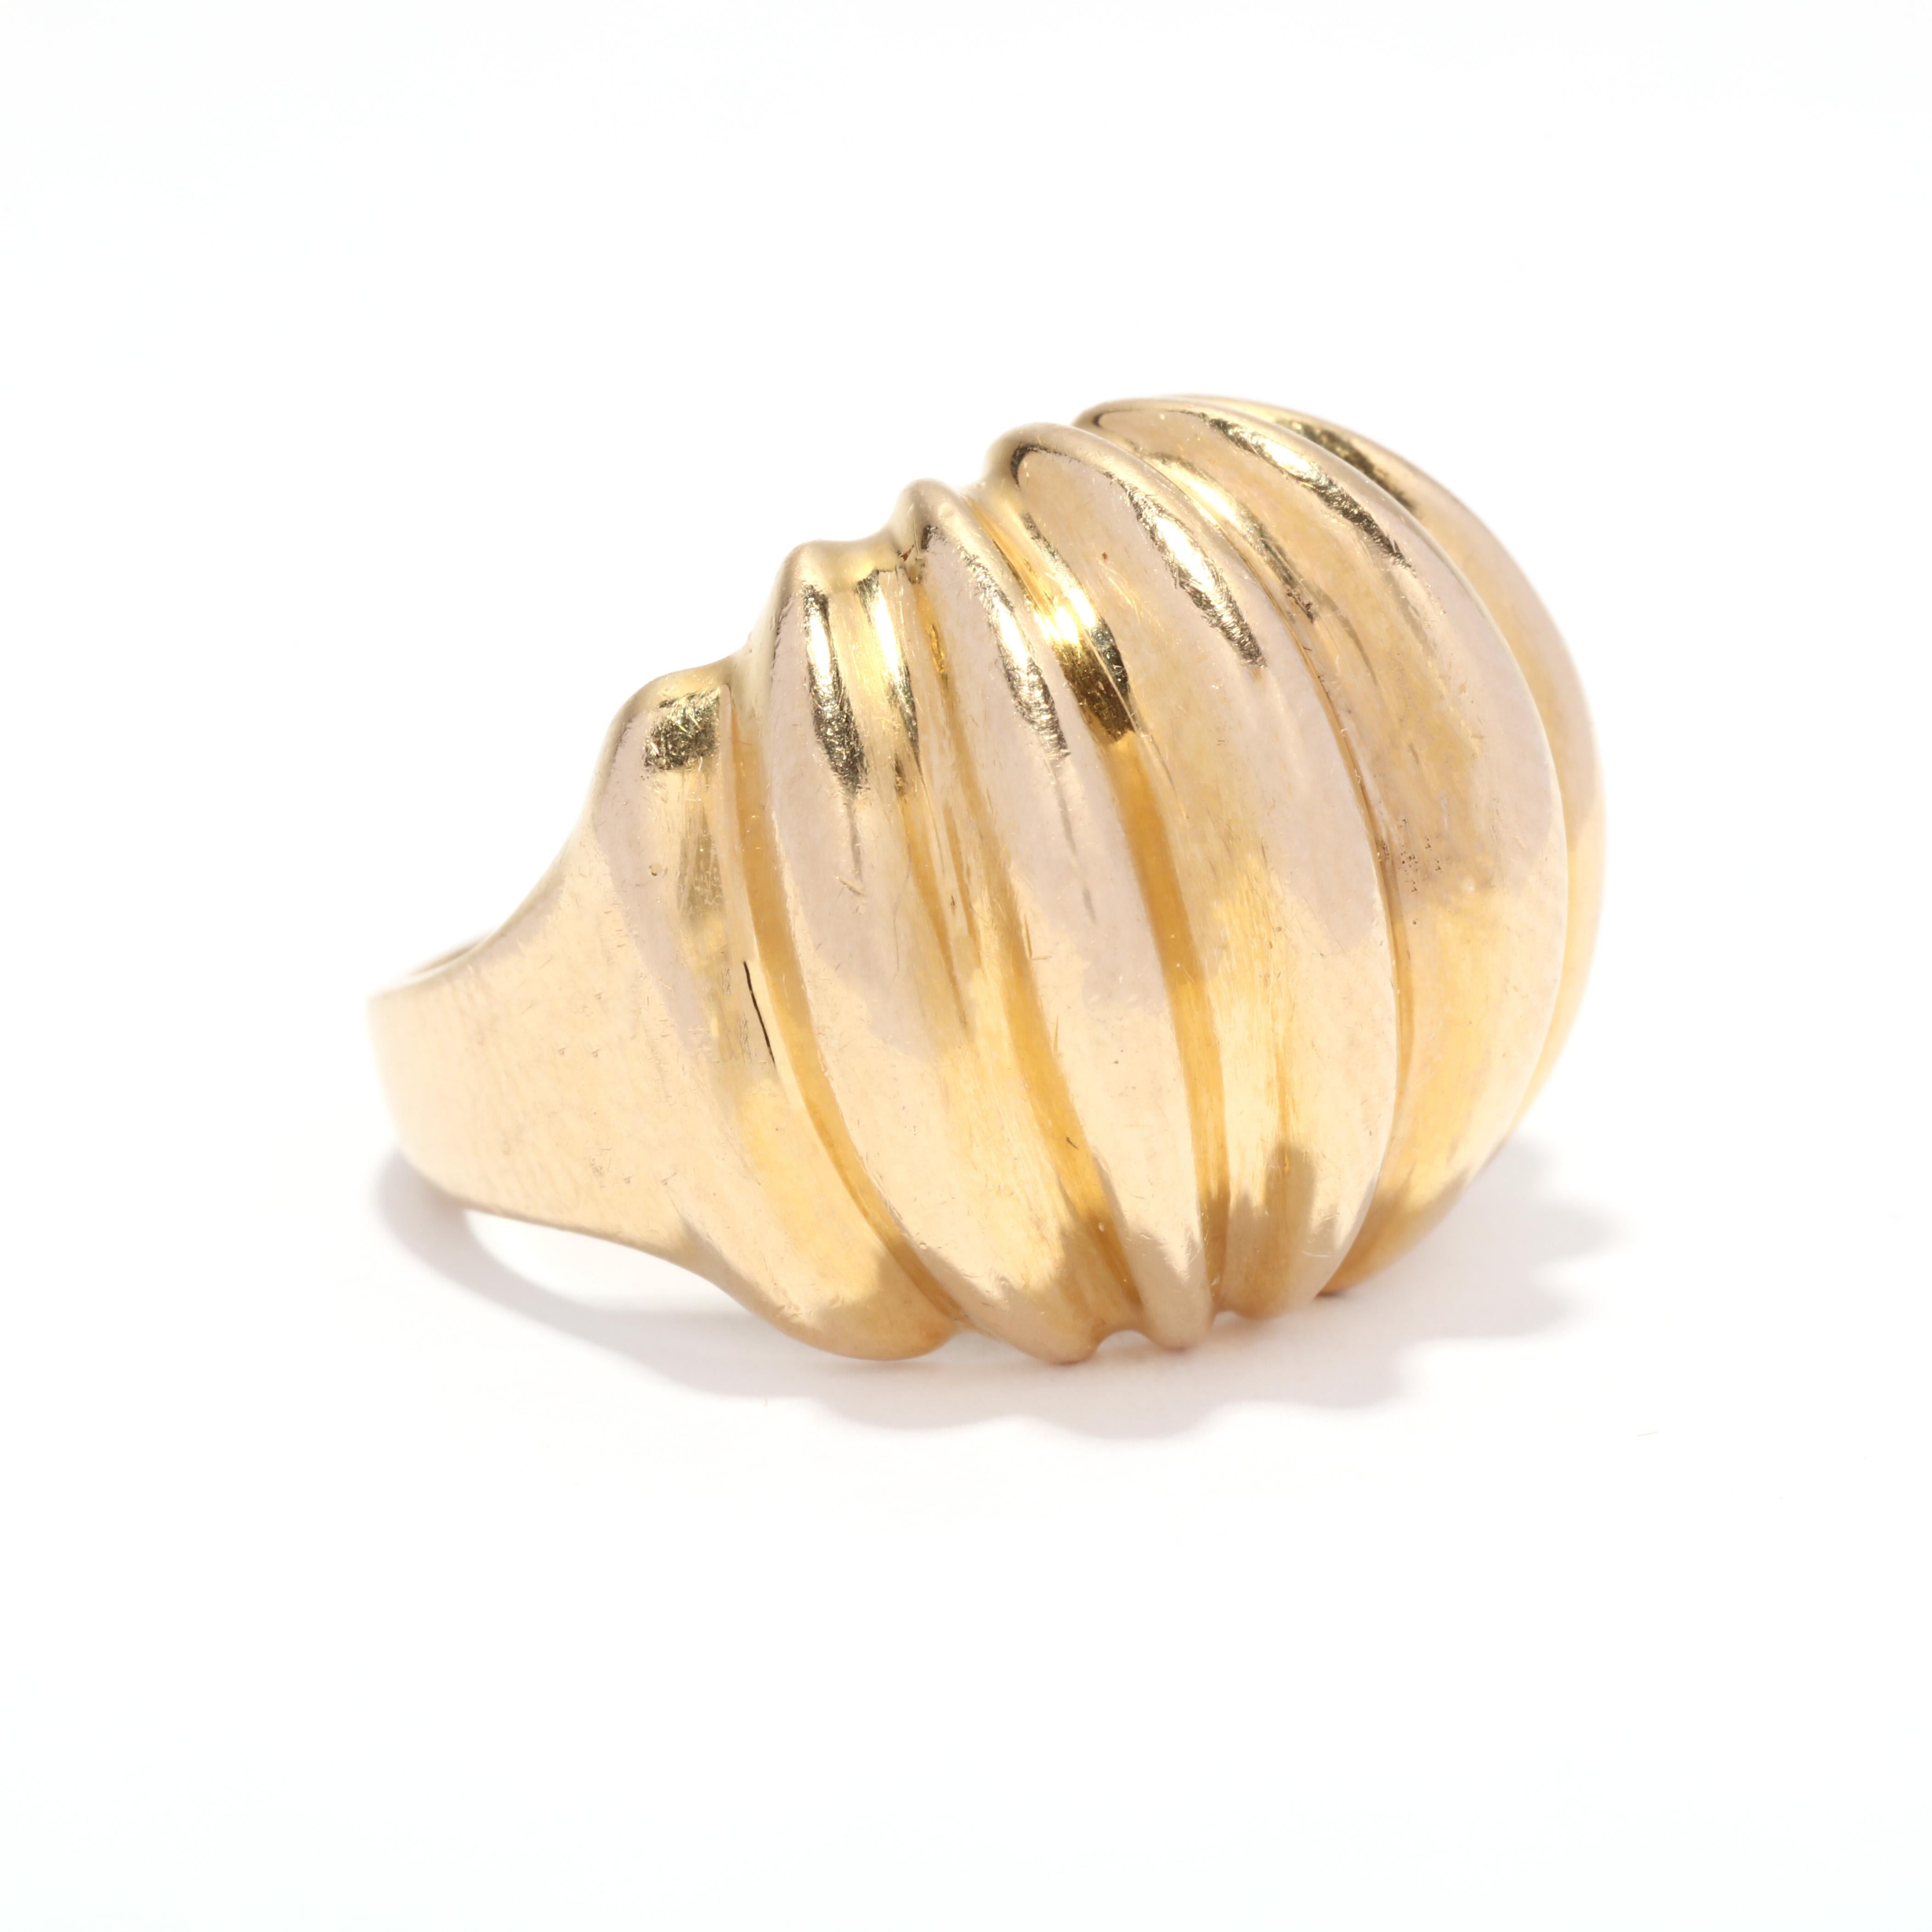 A vintage 18 karat yellow gold ridged dome ring. This ring features a dome design with a deep ridge motif and a tapered band.

Ring Size 5.5

Length: 5/8 in.

Weight: 8.8 dwts.

Ring Sizings & Modifications:
*Please reach out before your purchase